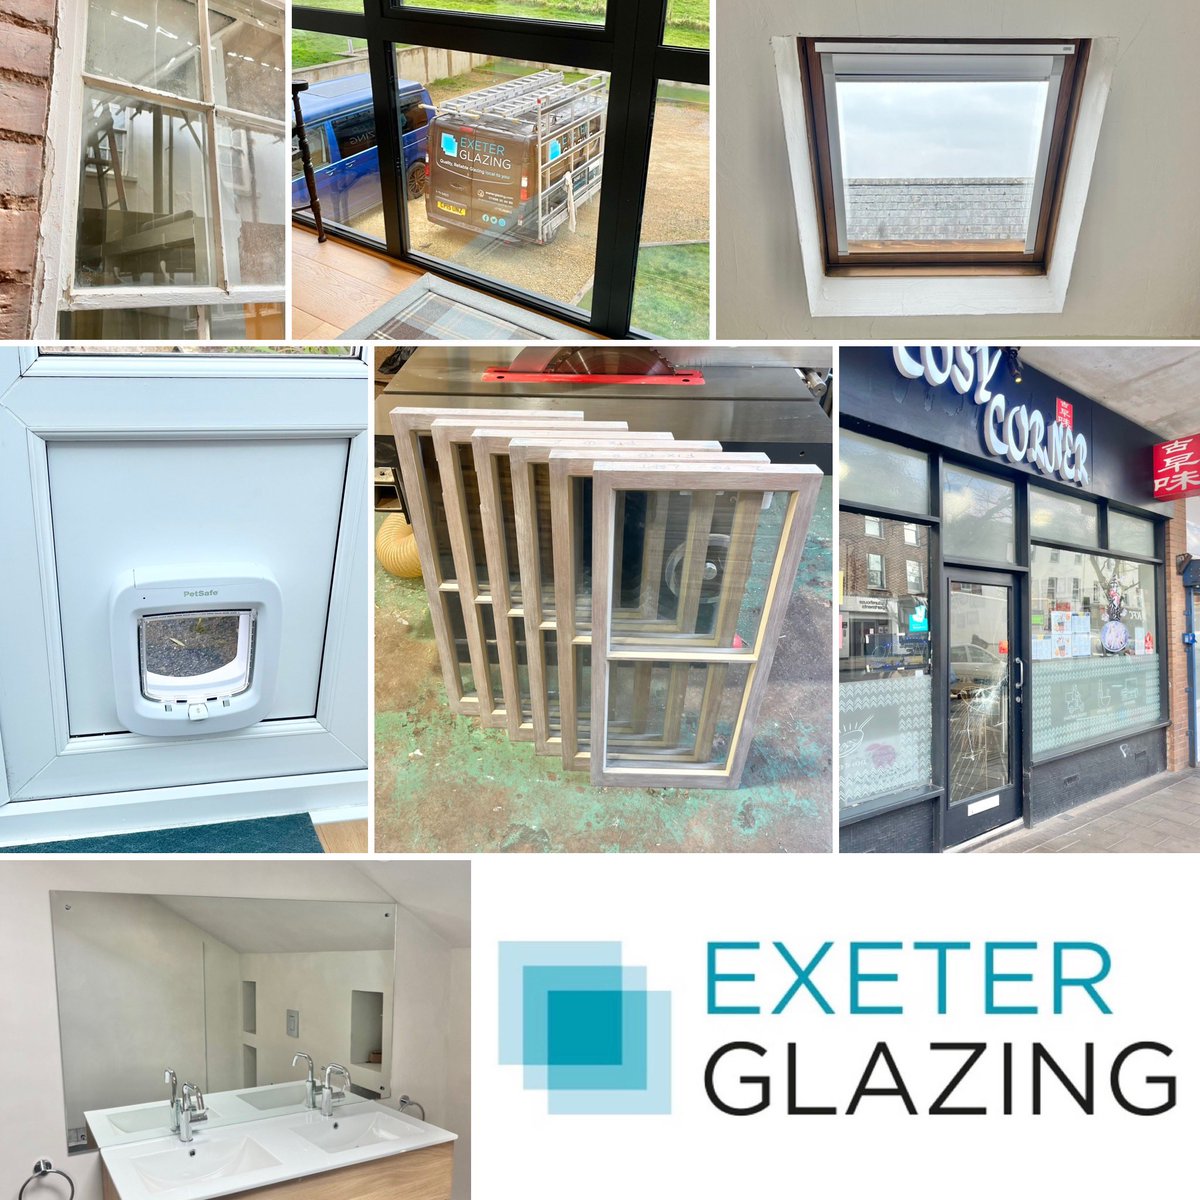 If you have any glass or glazing enquiries, get in touch for a free estimate.

#residential #commercial #glassreplacement #doubleglazing #singleglazing #mirror #putty #velux #catflap #cat #pet #pvcu #upvc #glass #glazing #glazier #exeter #exeterglazing #exeterbusiness